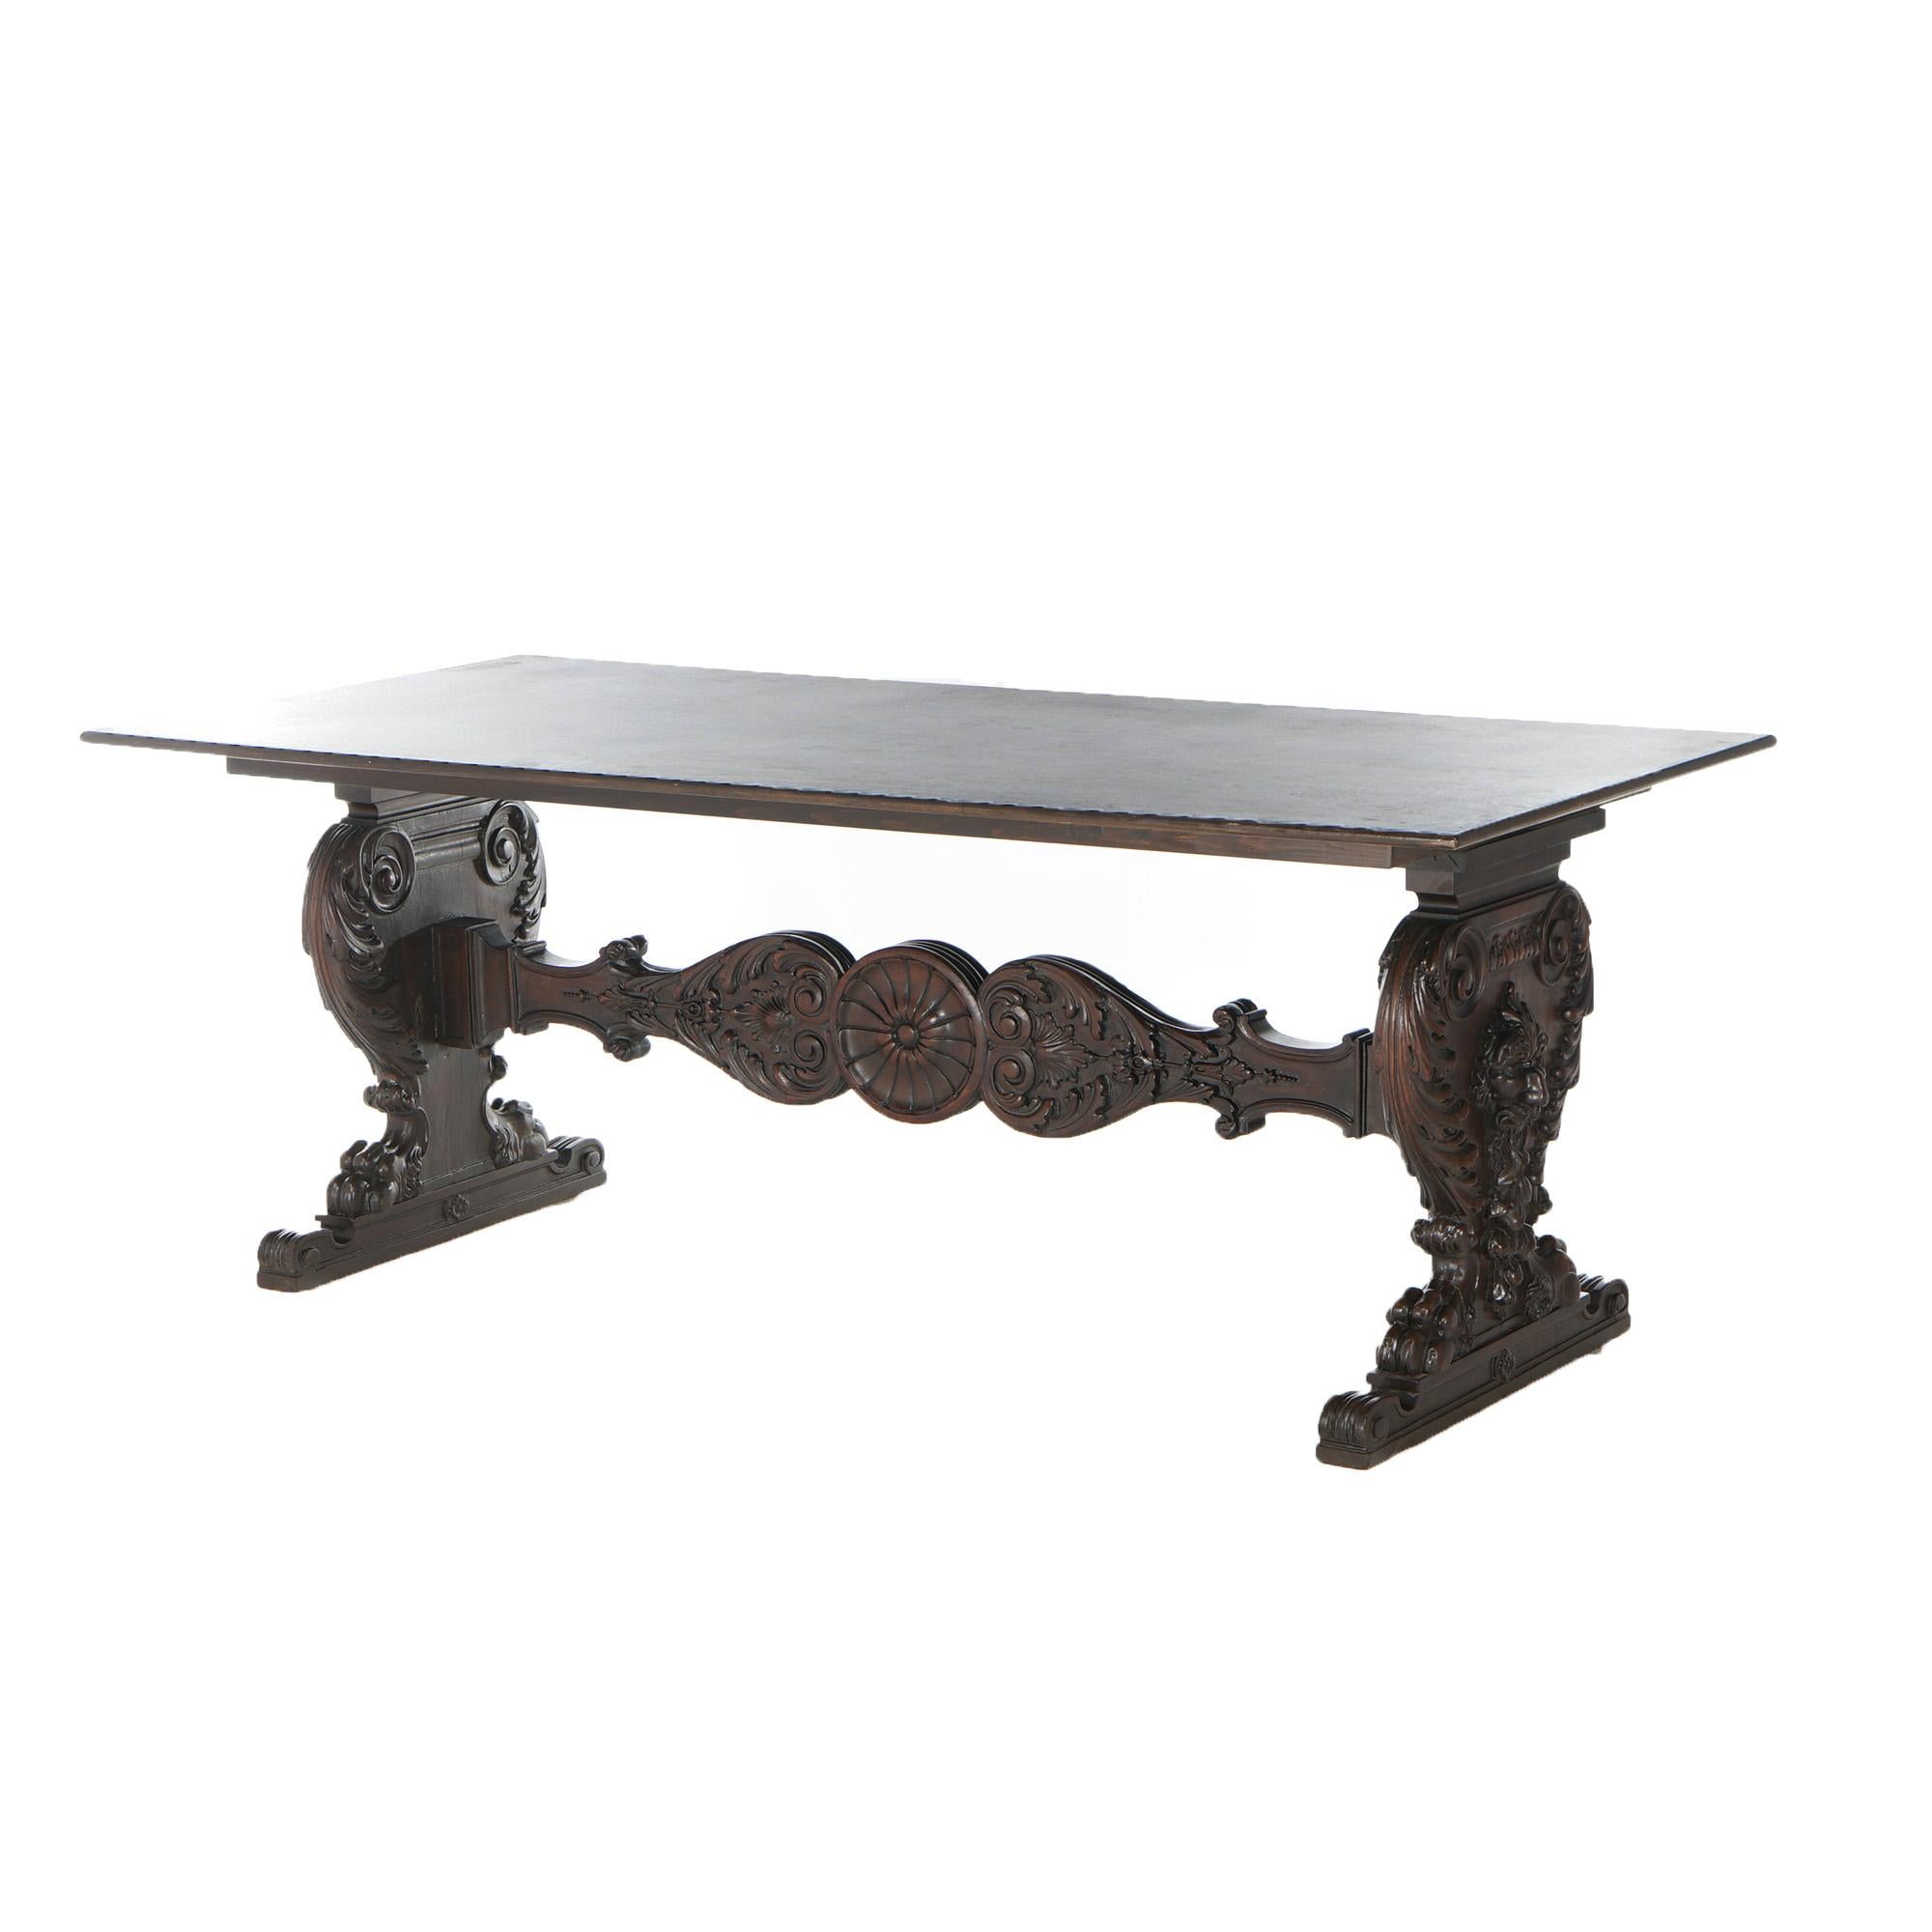 An antique figural banquet table offers oak construction with rectangular top over deeply carved foliate trestle legs with wind gods on the facing, c1890

Measures - 30.75